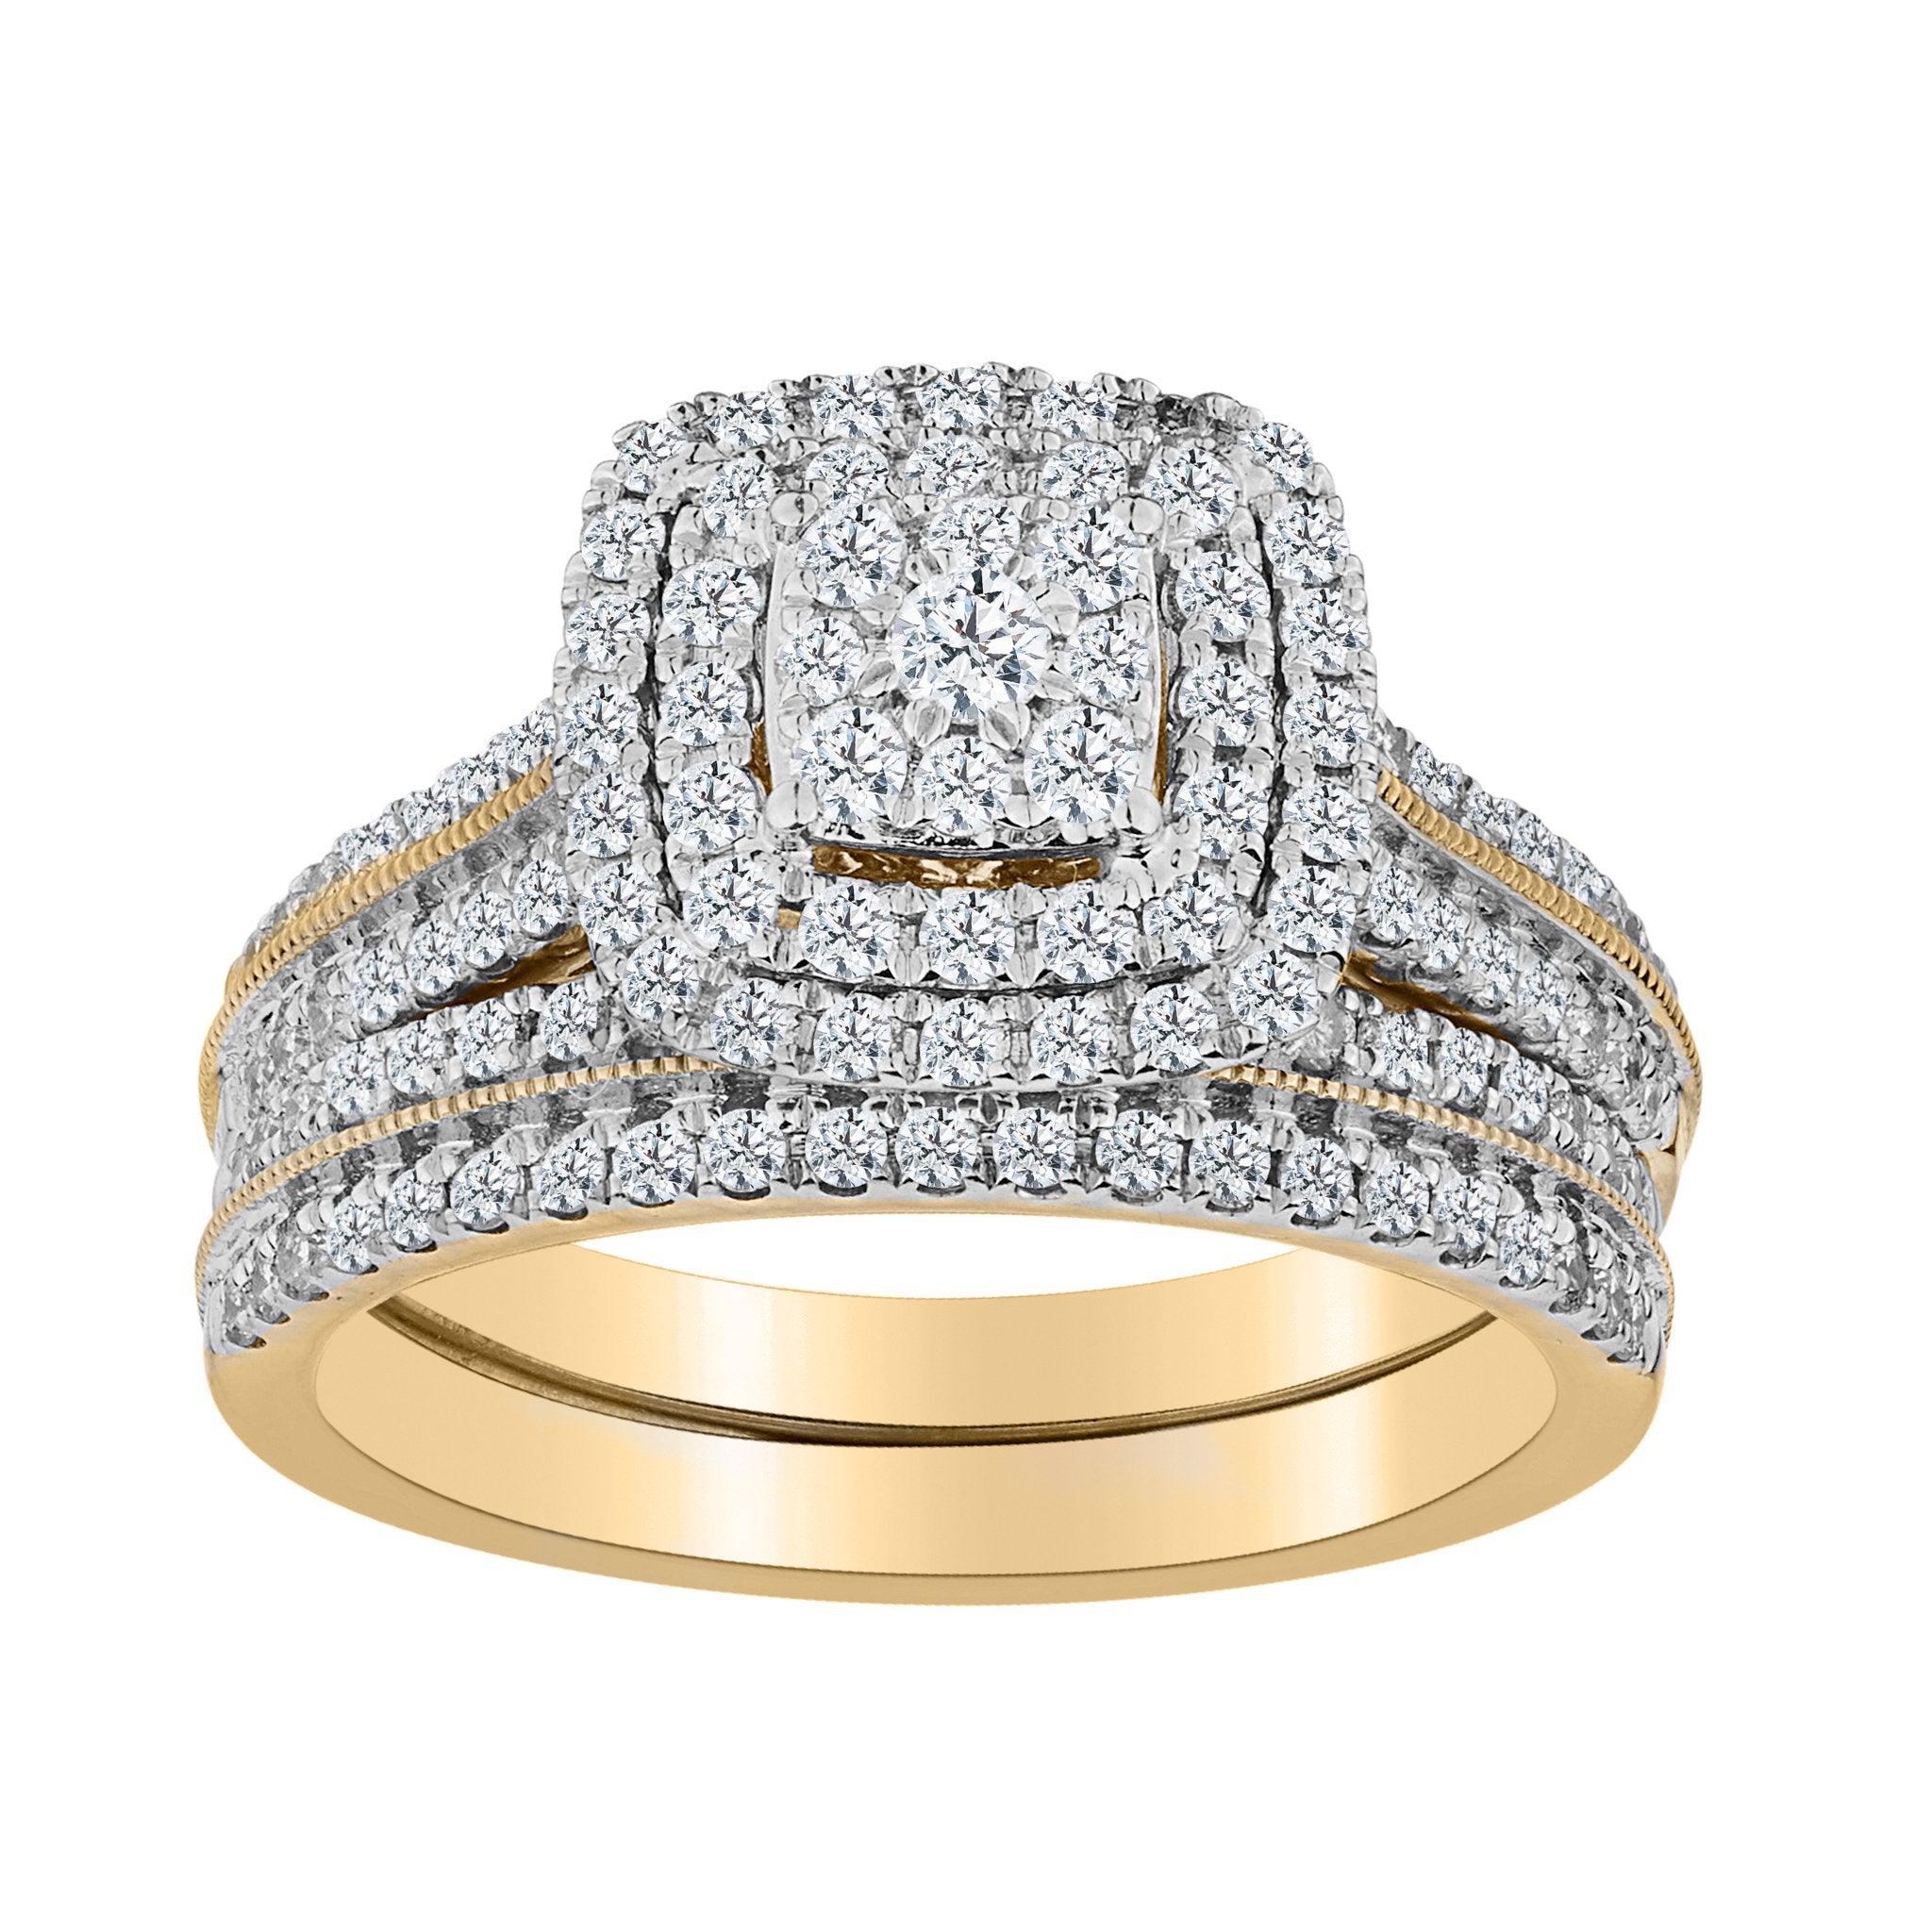 1.00 CARAT DIAMOND PAVE RING SET, 10kt YELLOW GOLD - Griffin Jewellery Designs